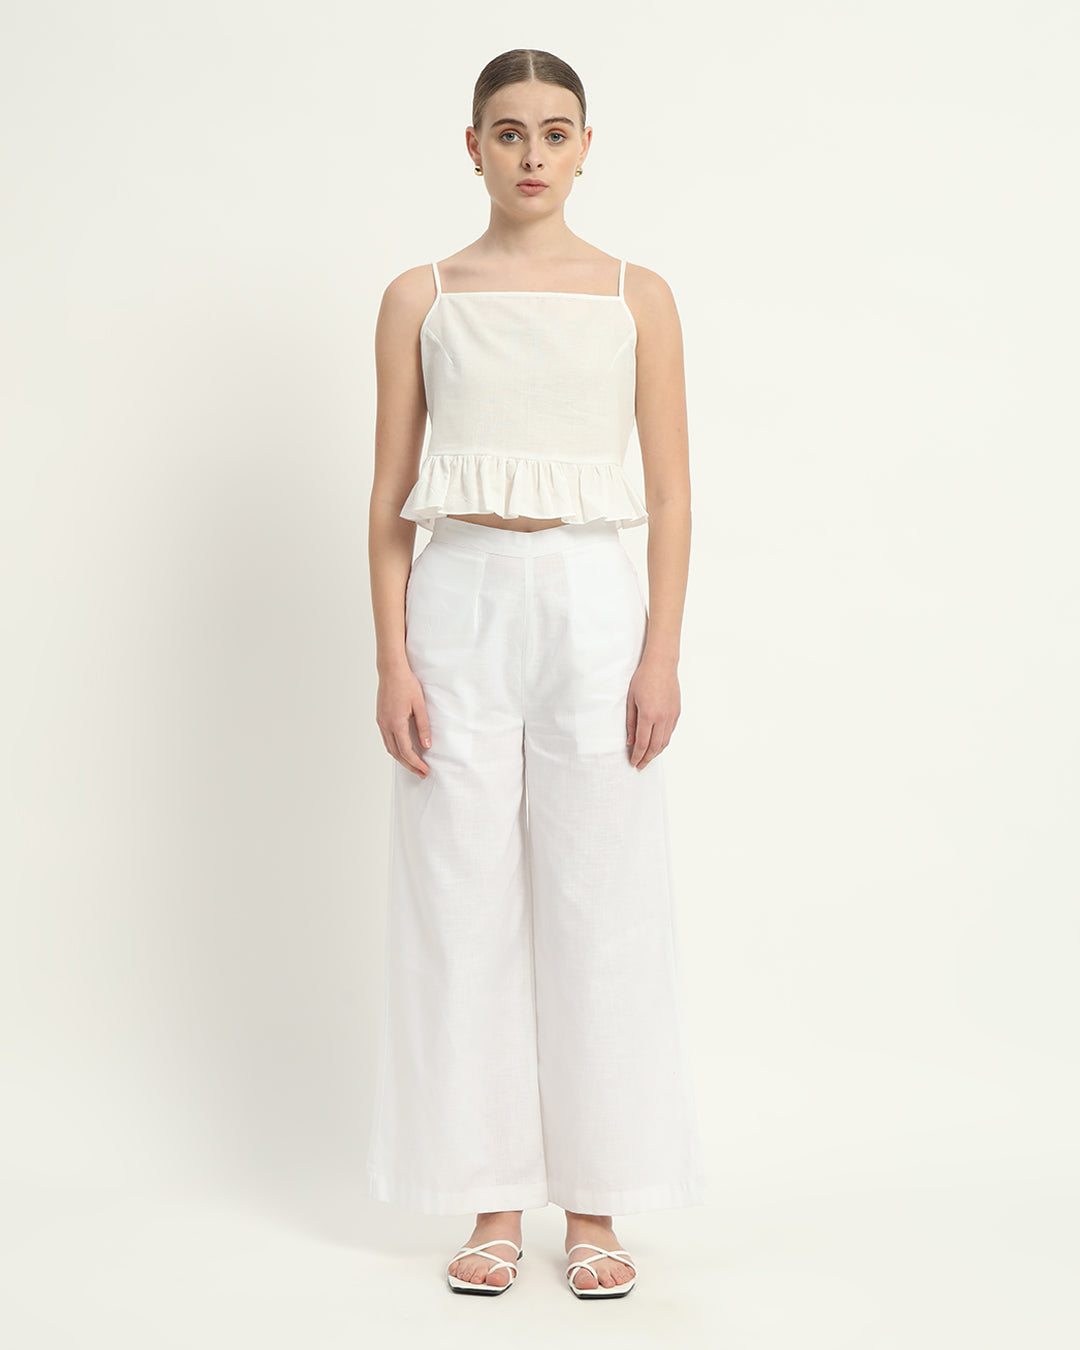 Pants Matching Set- White Linen Whimsical Willow